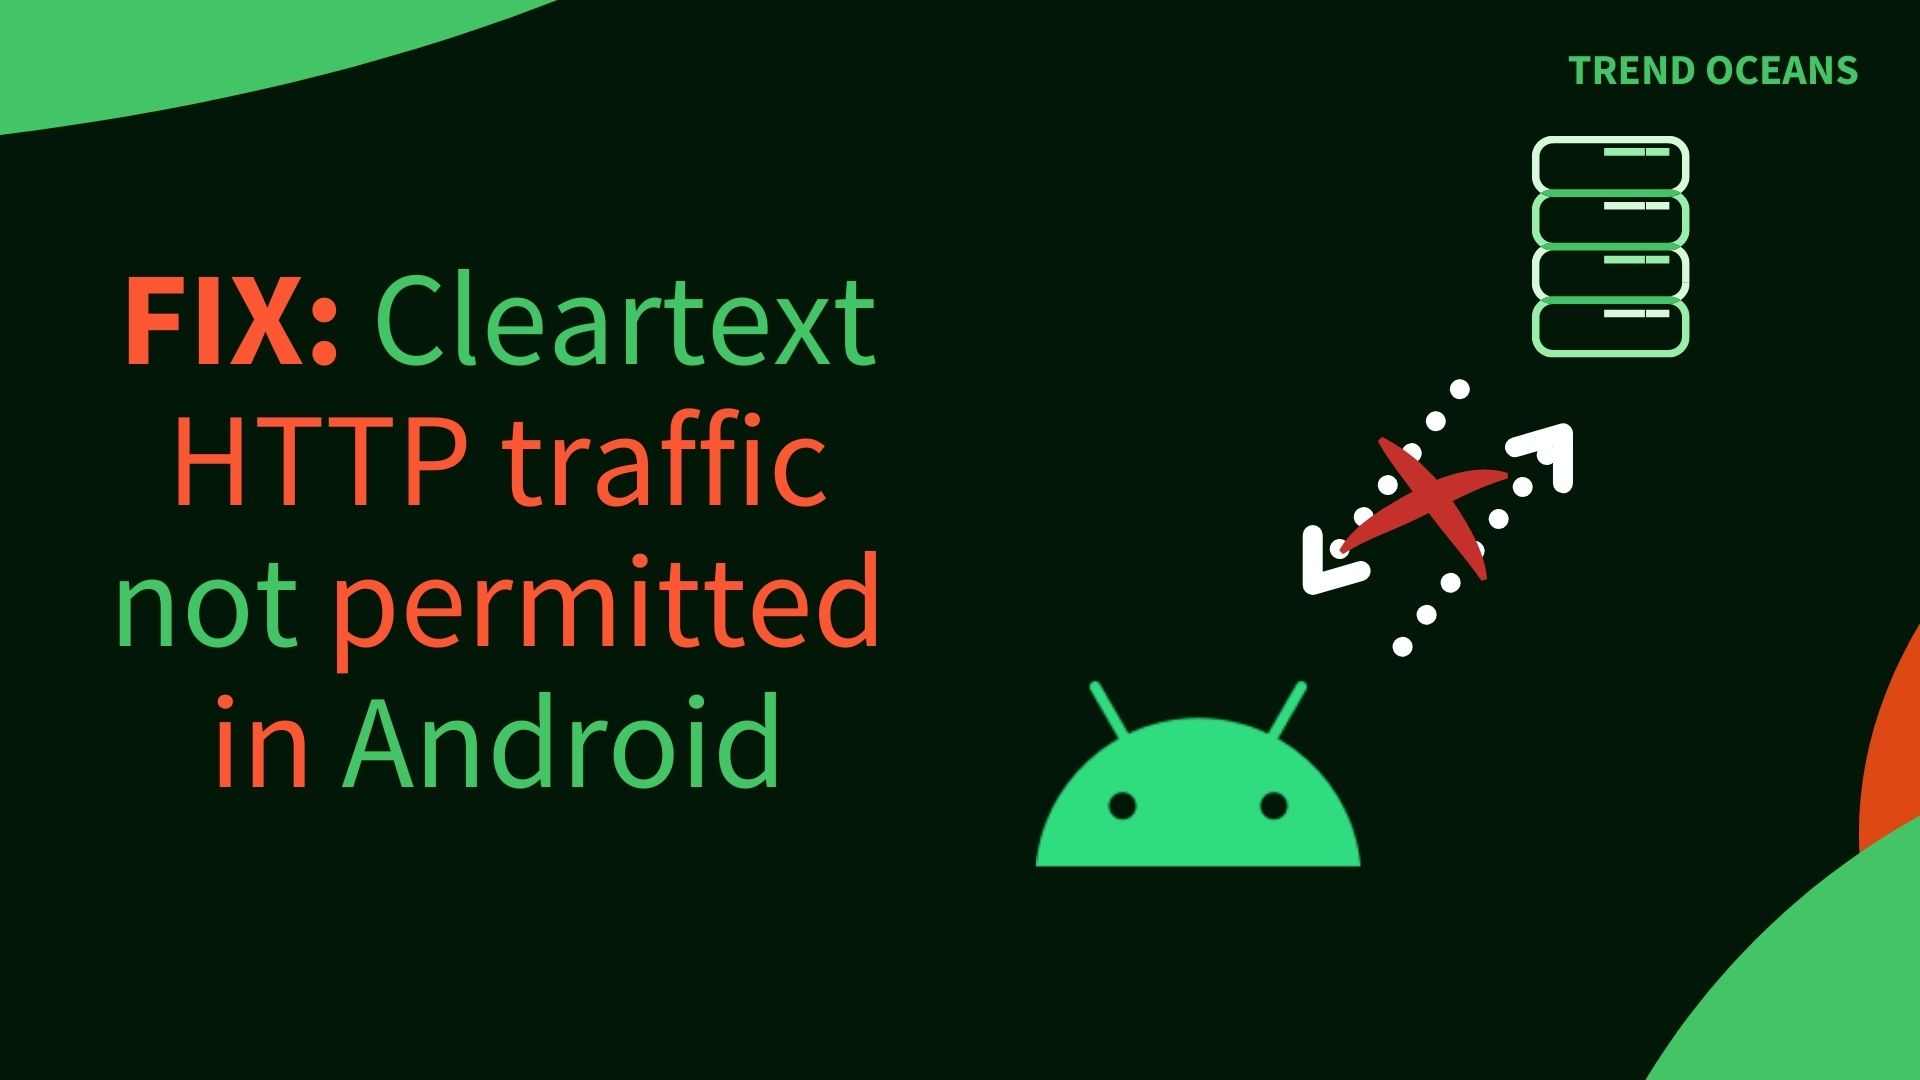 FIX: Cleartext HTTP traffic not permitted in Android